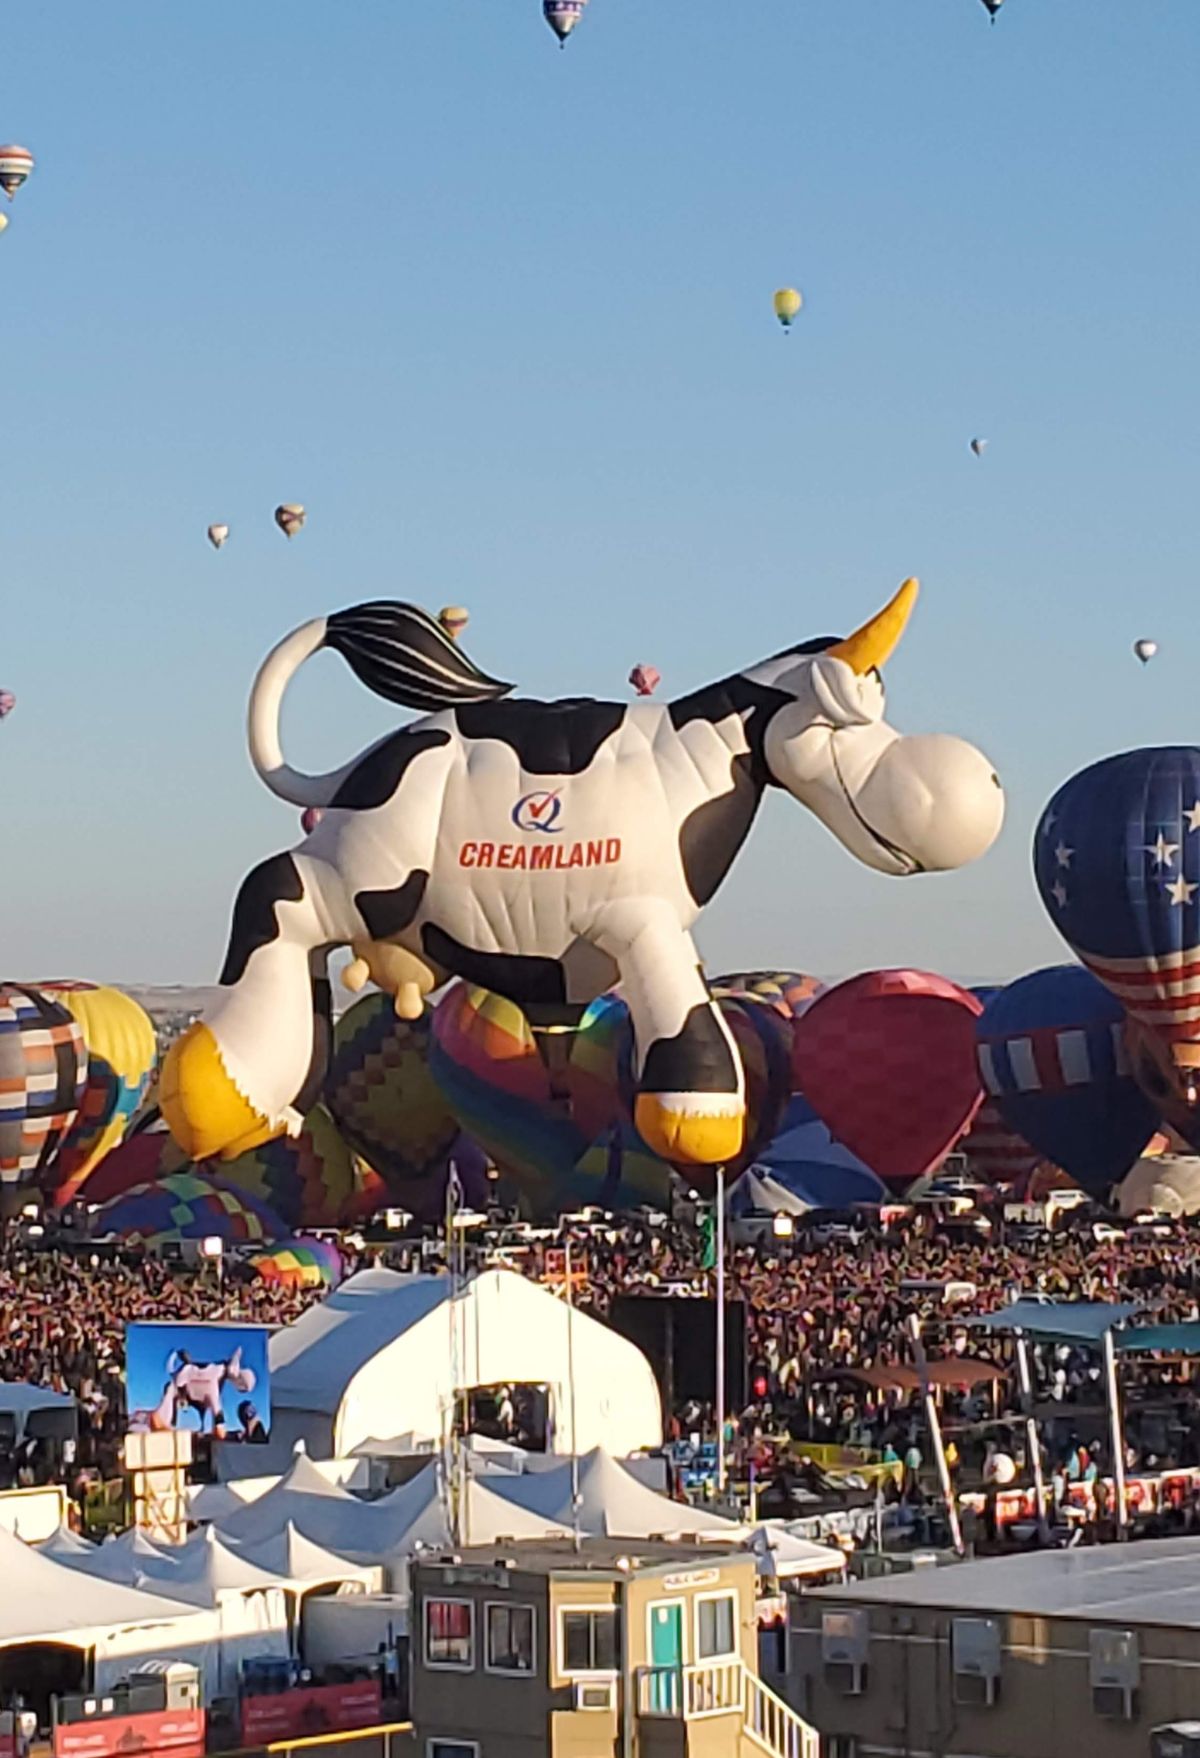 A large hot air balloon with a cow on it.